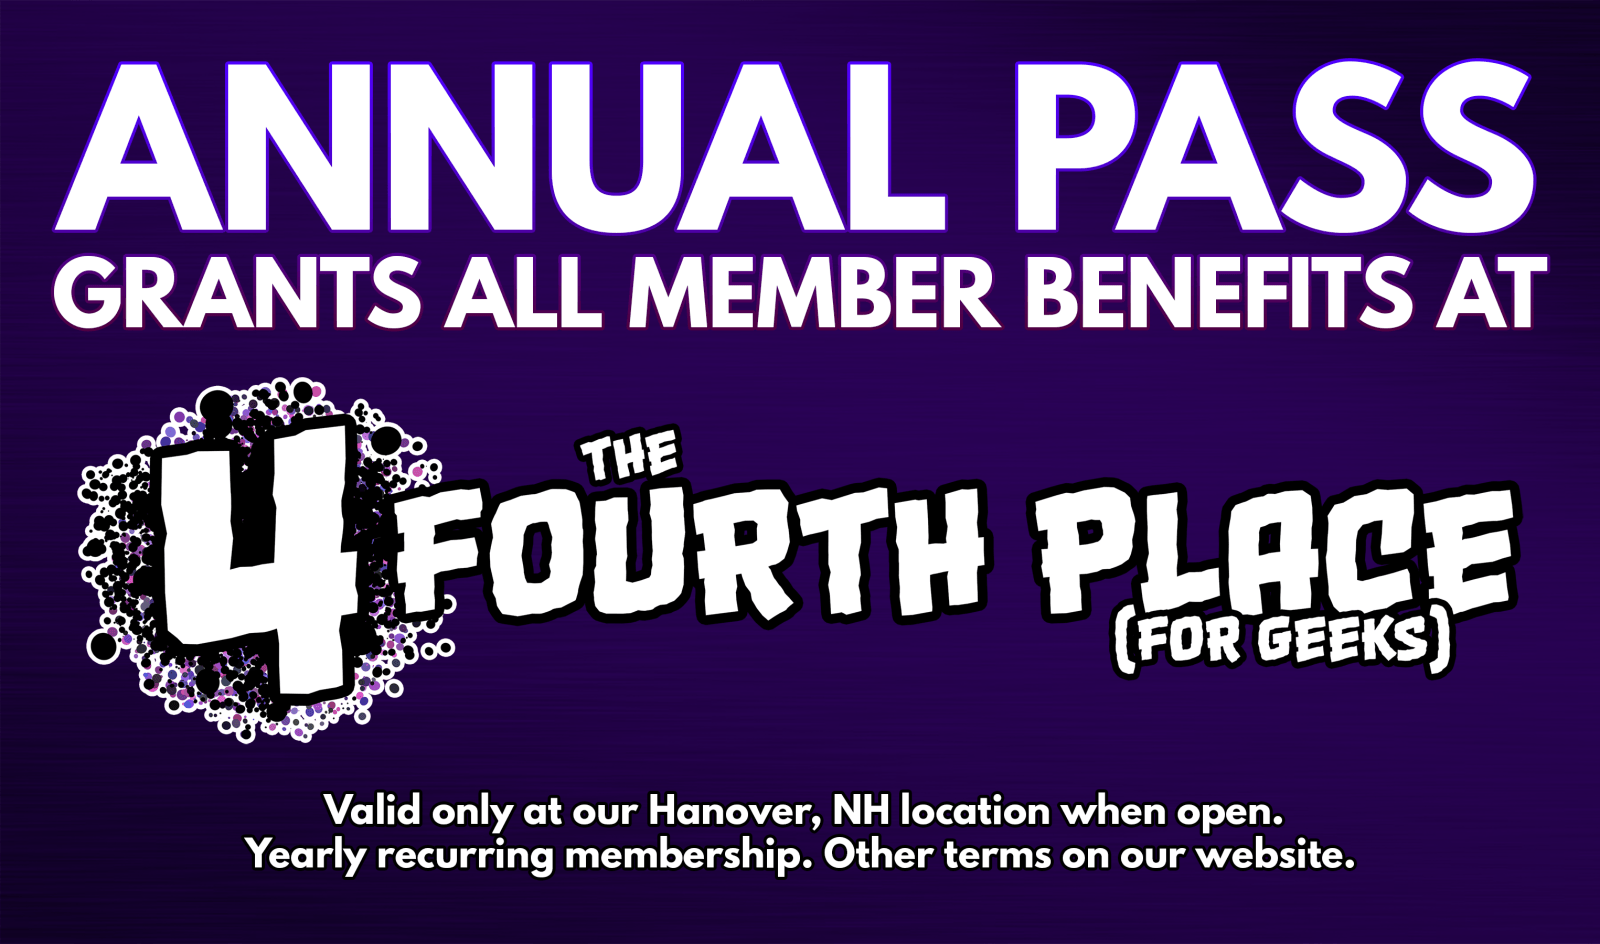 Annual Membership (Hanover, NH) - The Fourth Place